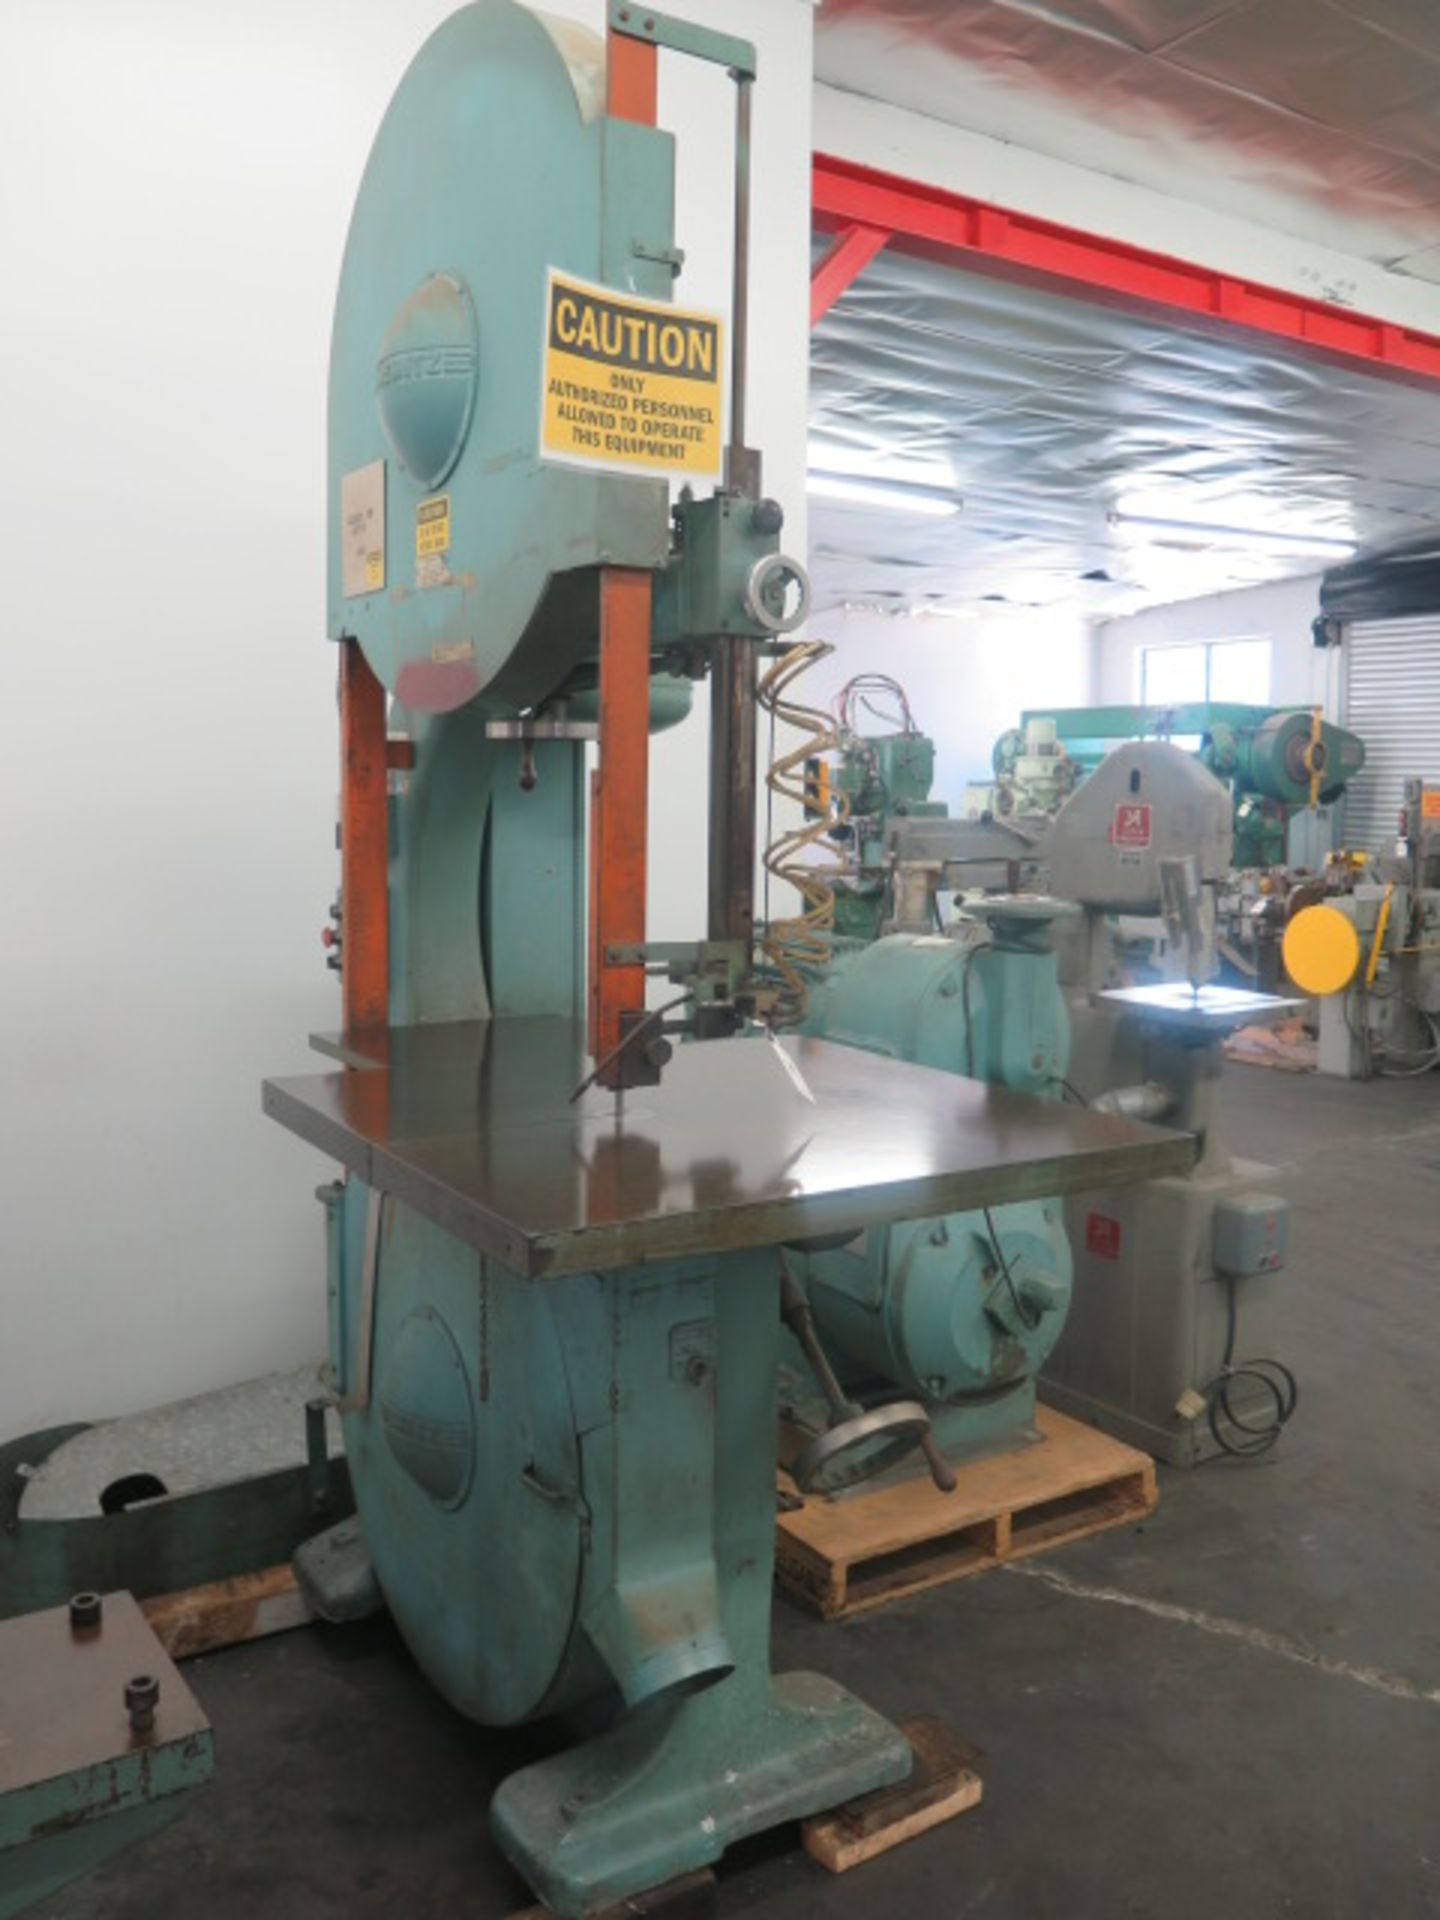 Tannewitz mdl. 6V1E 35” Vertical Band Saw s/n 83041 w/ Reeves Vari-Drive Speed Controller